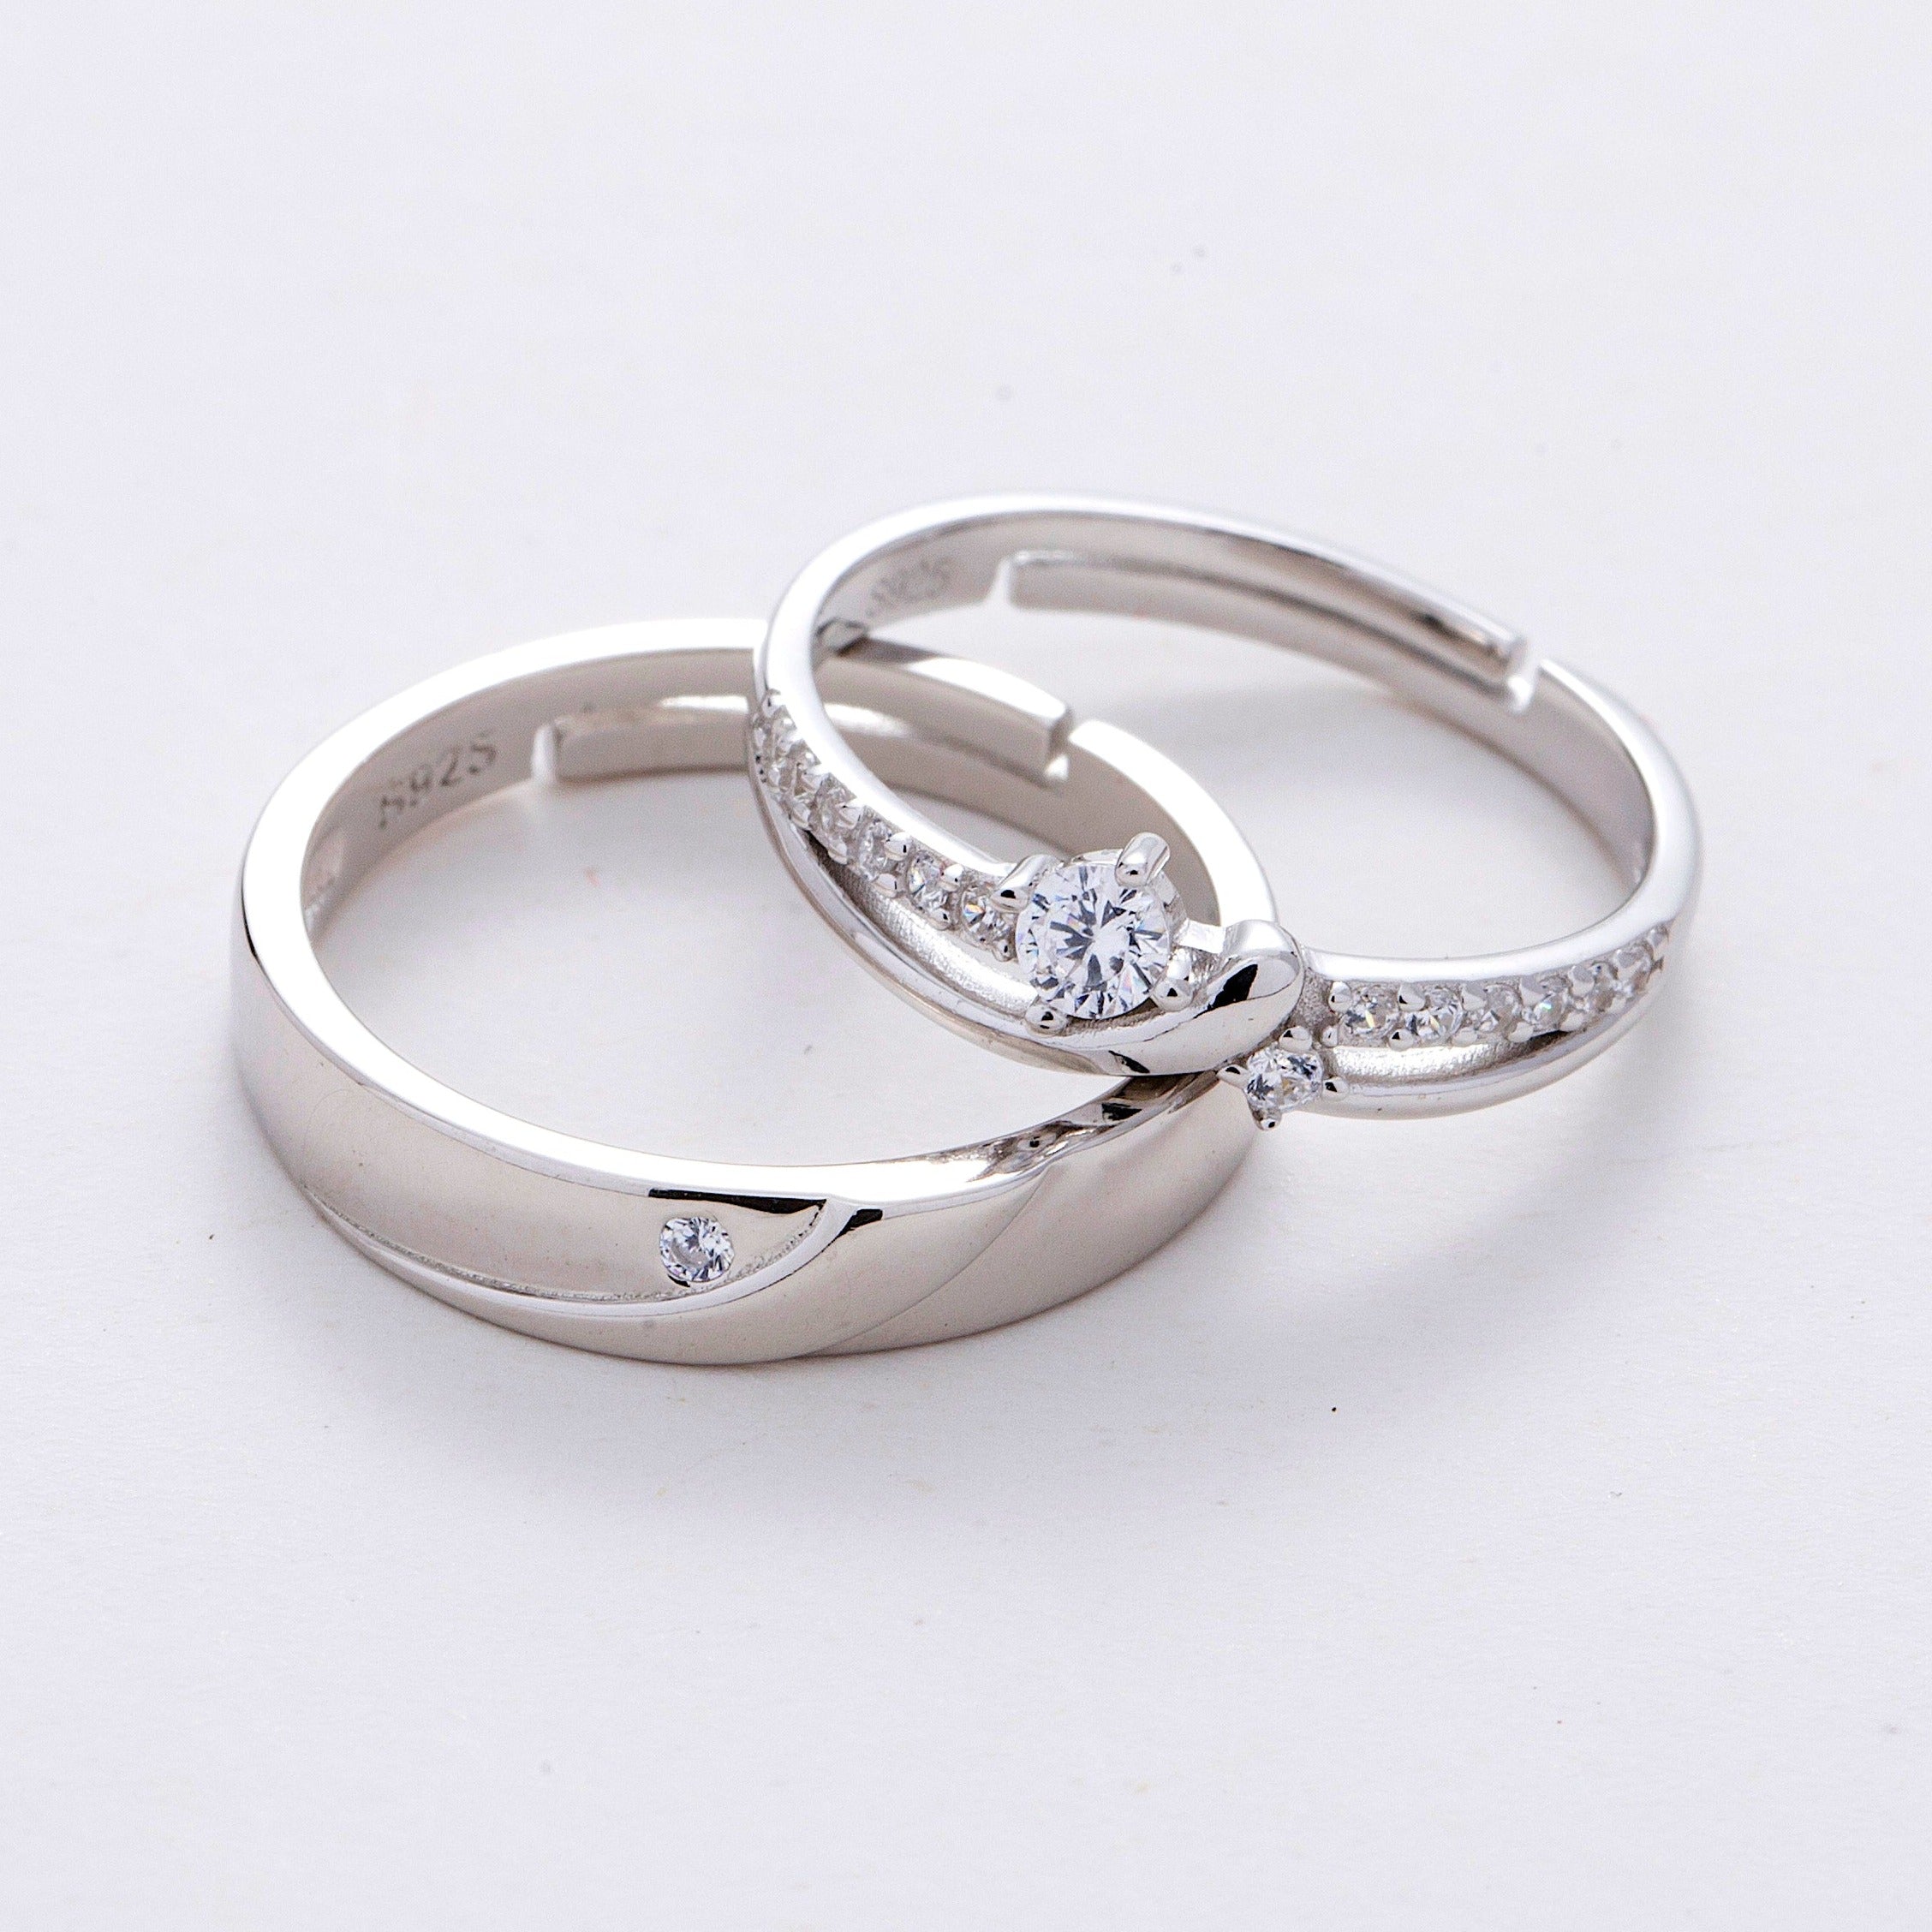 Amazon.com: Meissa Couple Rings 925 Sterling Silver Dainty Twist Couple  Bandsfor Men and WomenSize Adjustable Handmade Promise Rings (Set of Two  Rings) : Handmade Products